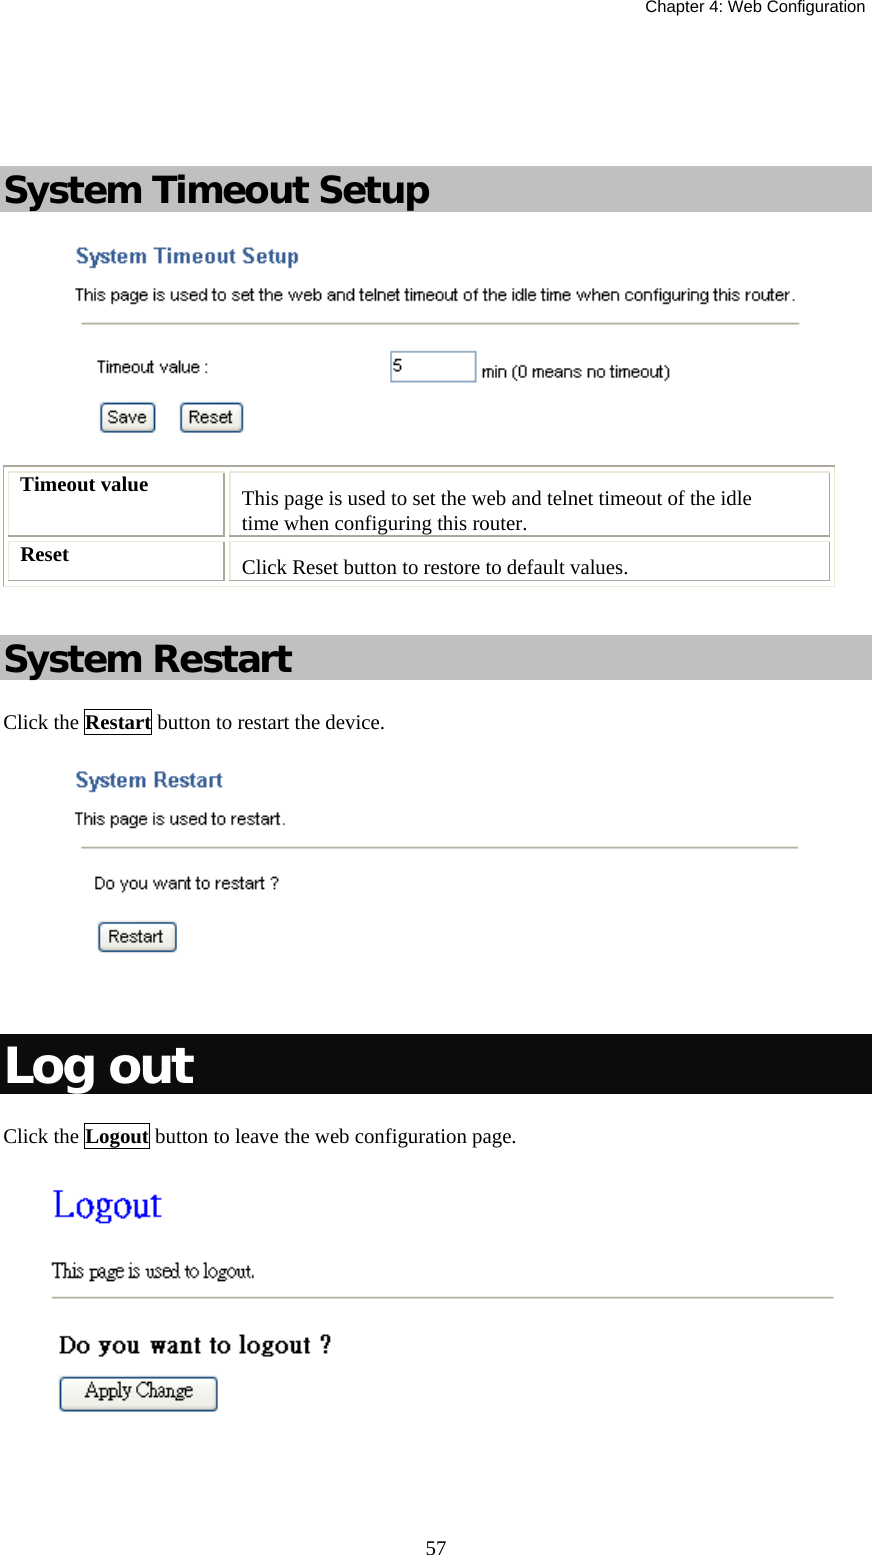   Chapter 4: Web Configuration  57   System Timeout Setup  Timeout value  This page is used to set the web and telnet timeout of the idle time when configuring this router. Reset  Click Reset button to restore to default values.   System Restart Click the Restart button to restart the device.    Log out Click the Logout button to leave the web configuration page.  